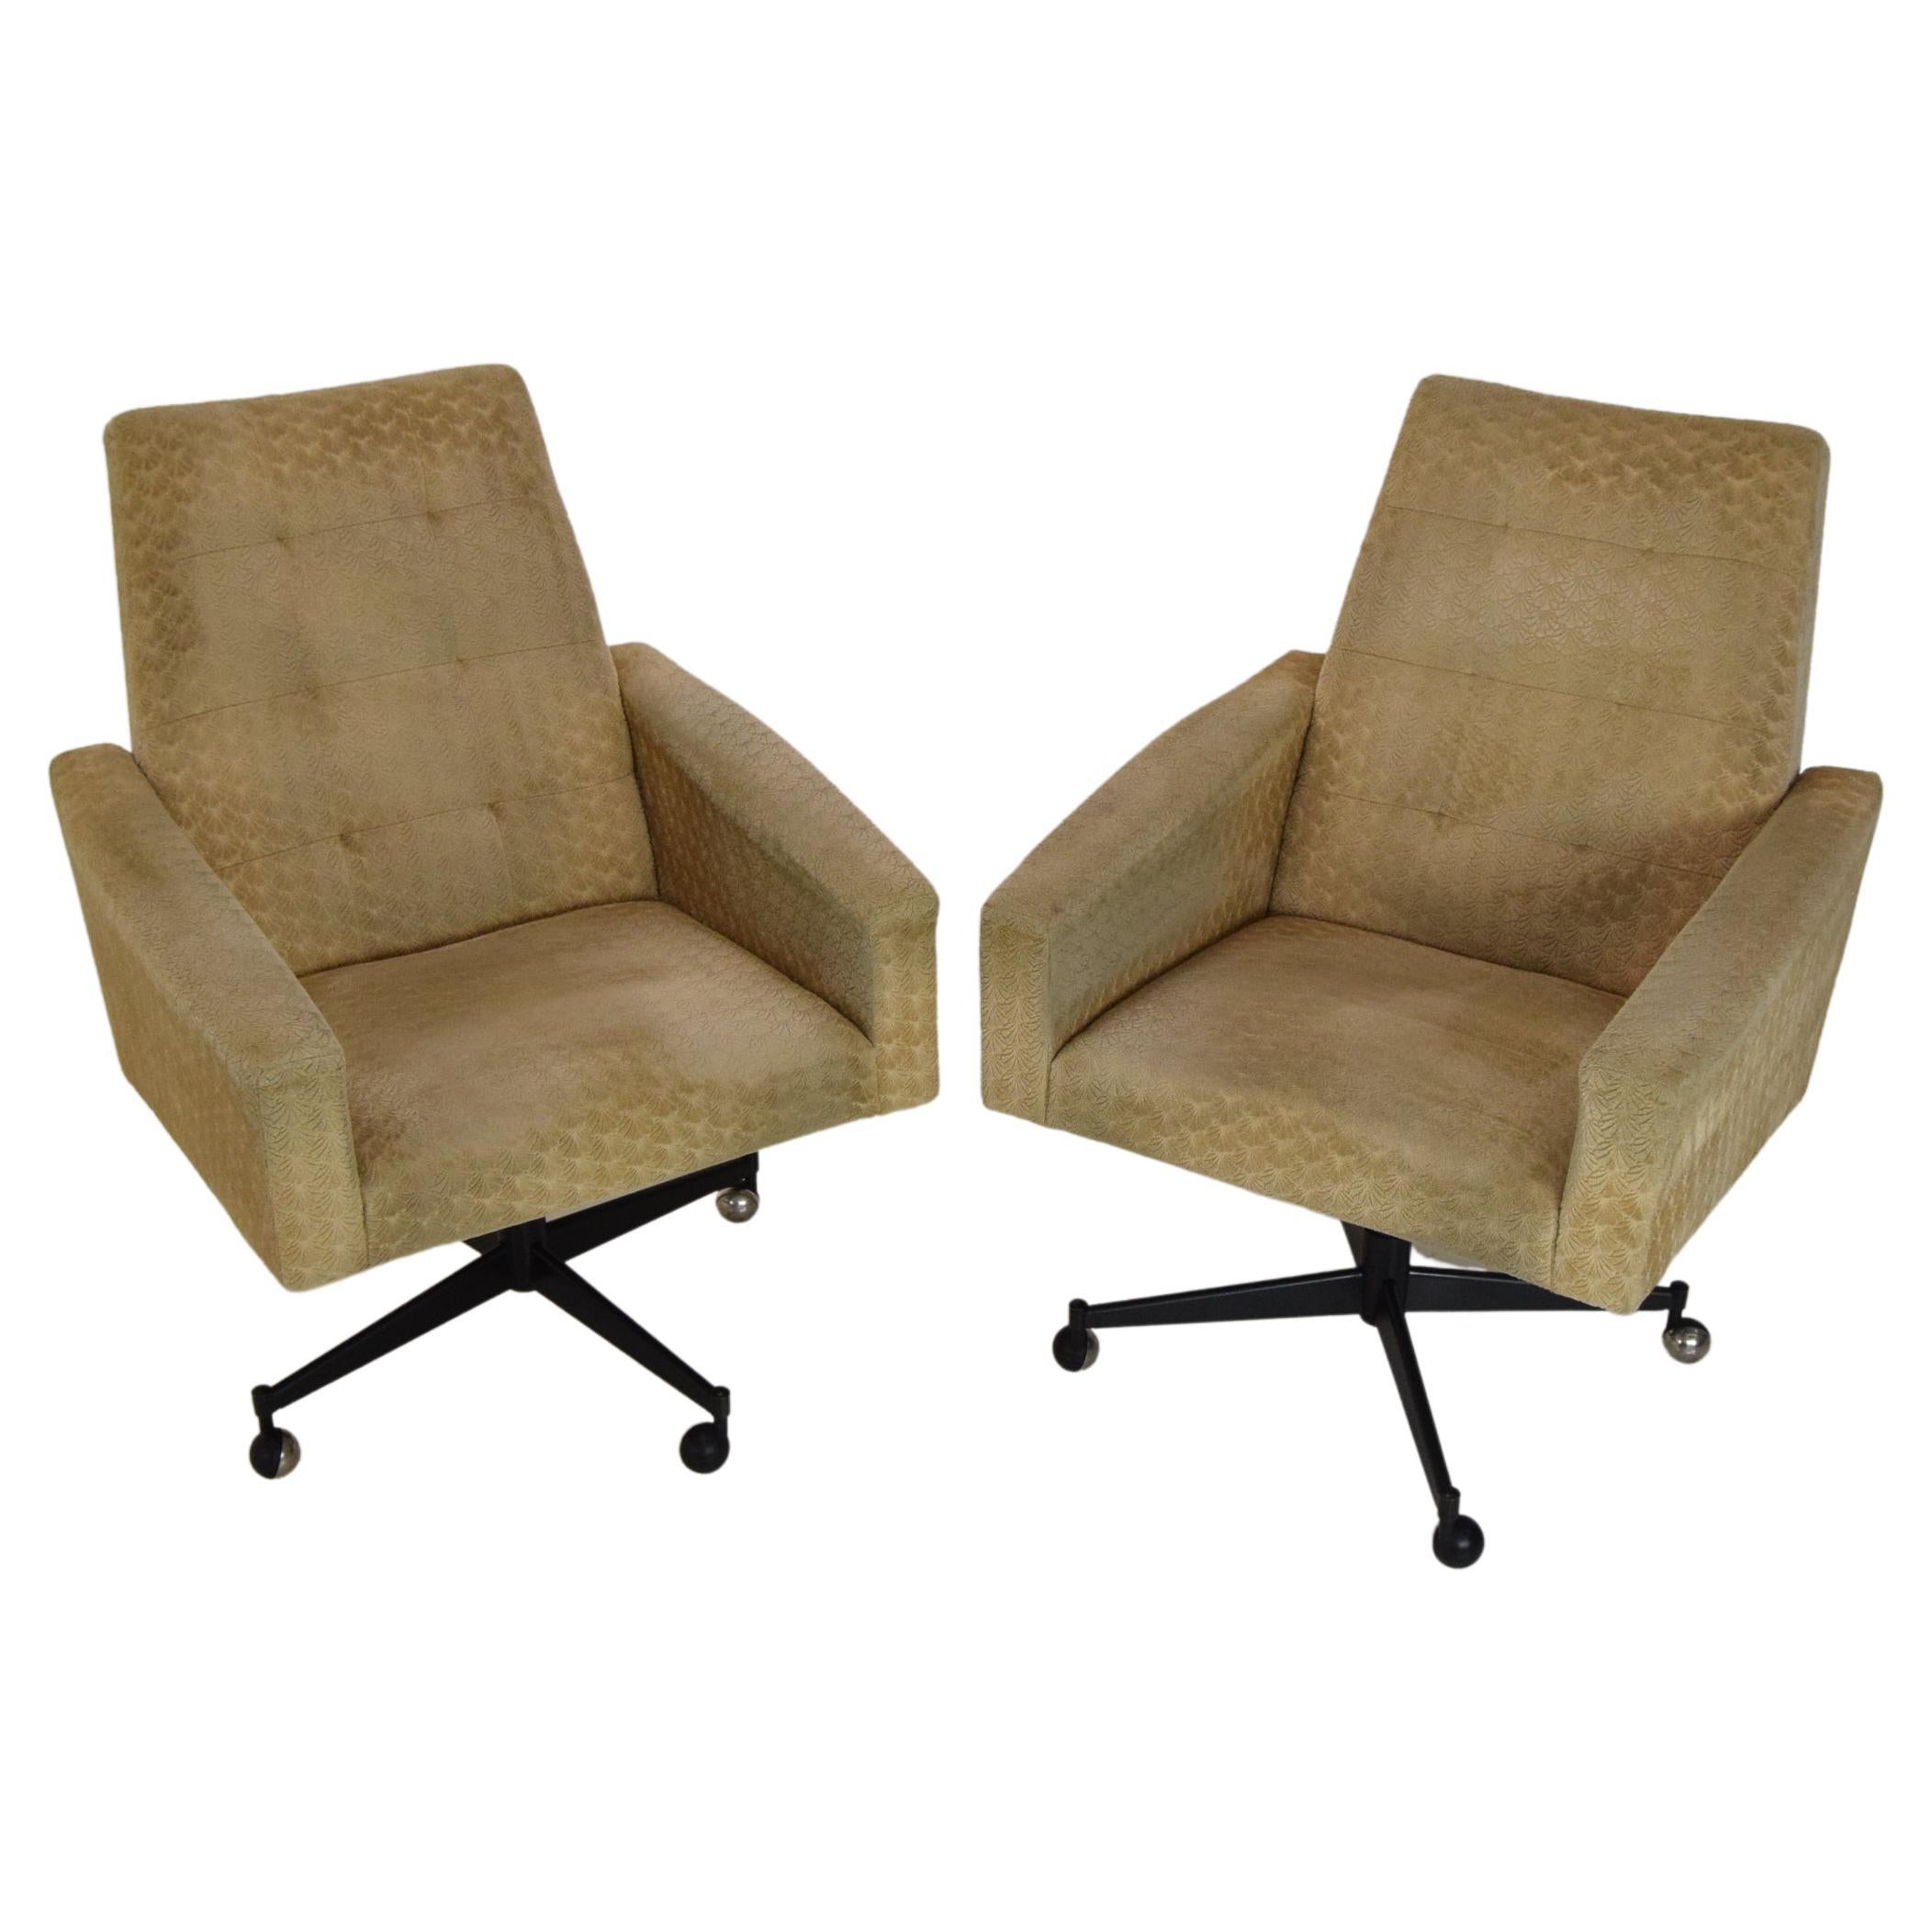 Pair of Midcentury Swivel Armchairs with Wheels, 1970s.  For Sale